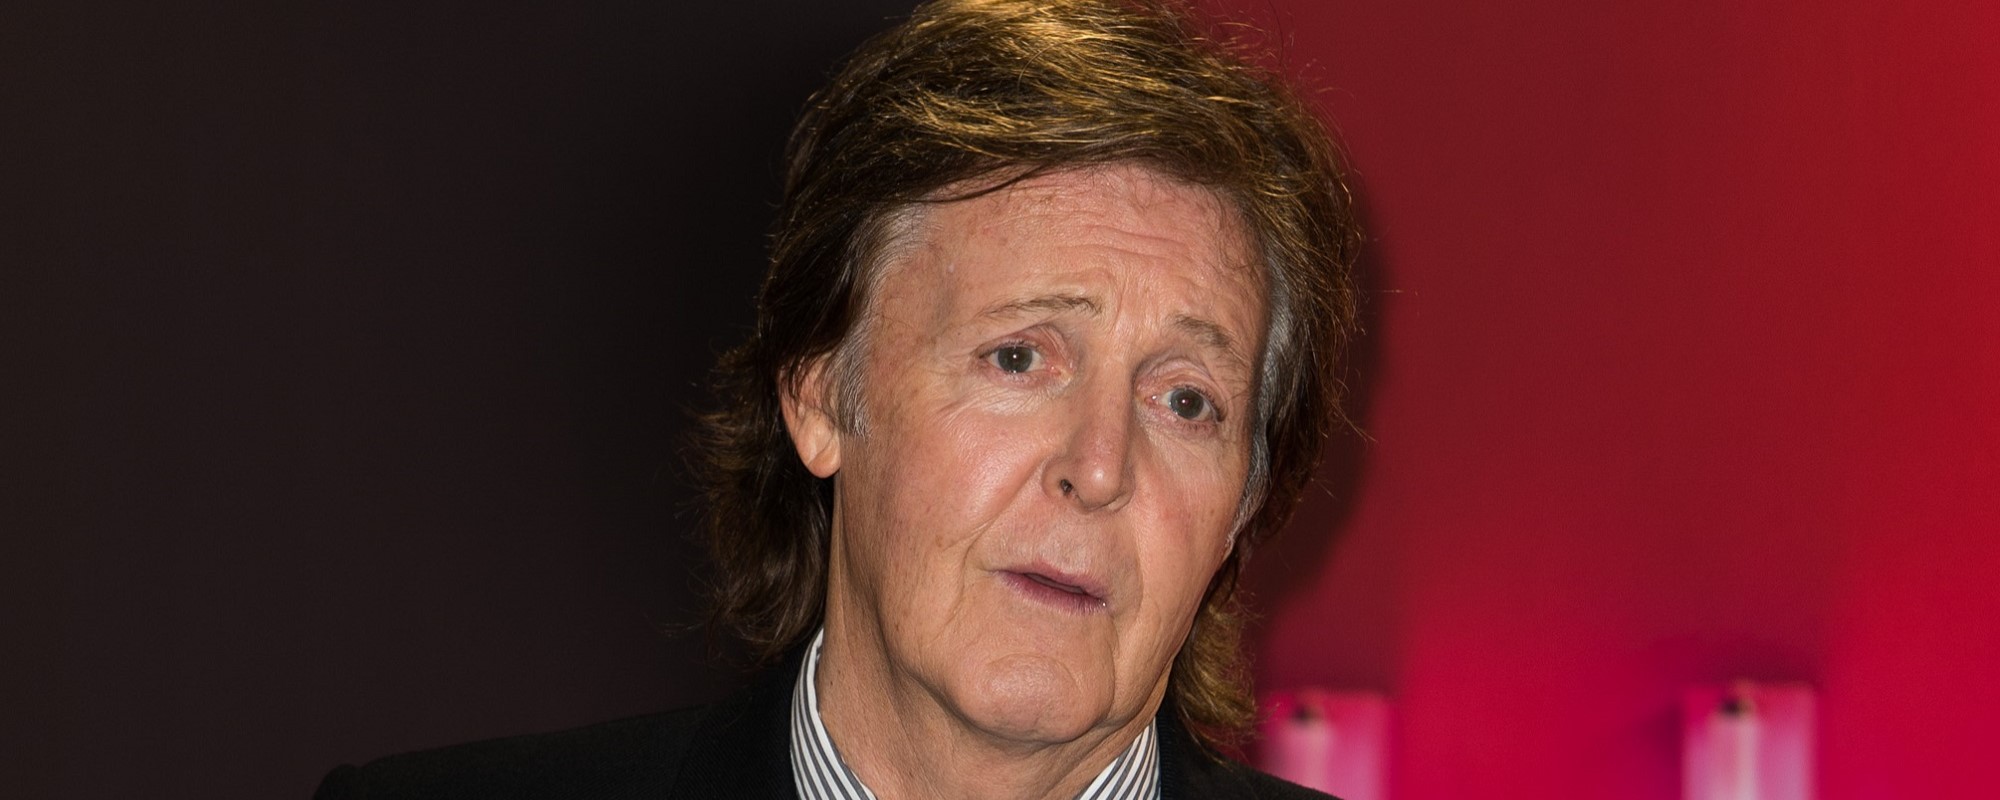 Paul McCartney: 'I cried for a year when Linda died' - BBC News